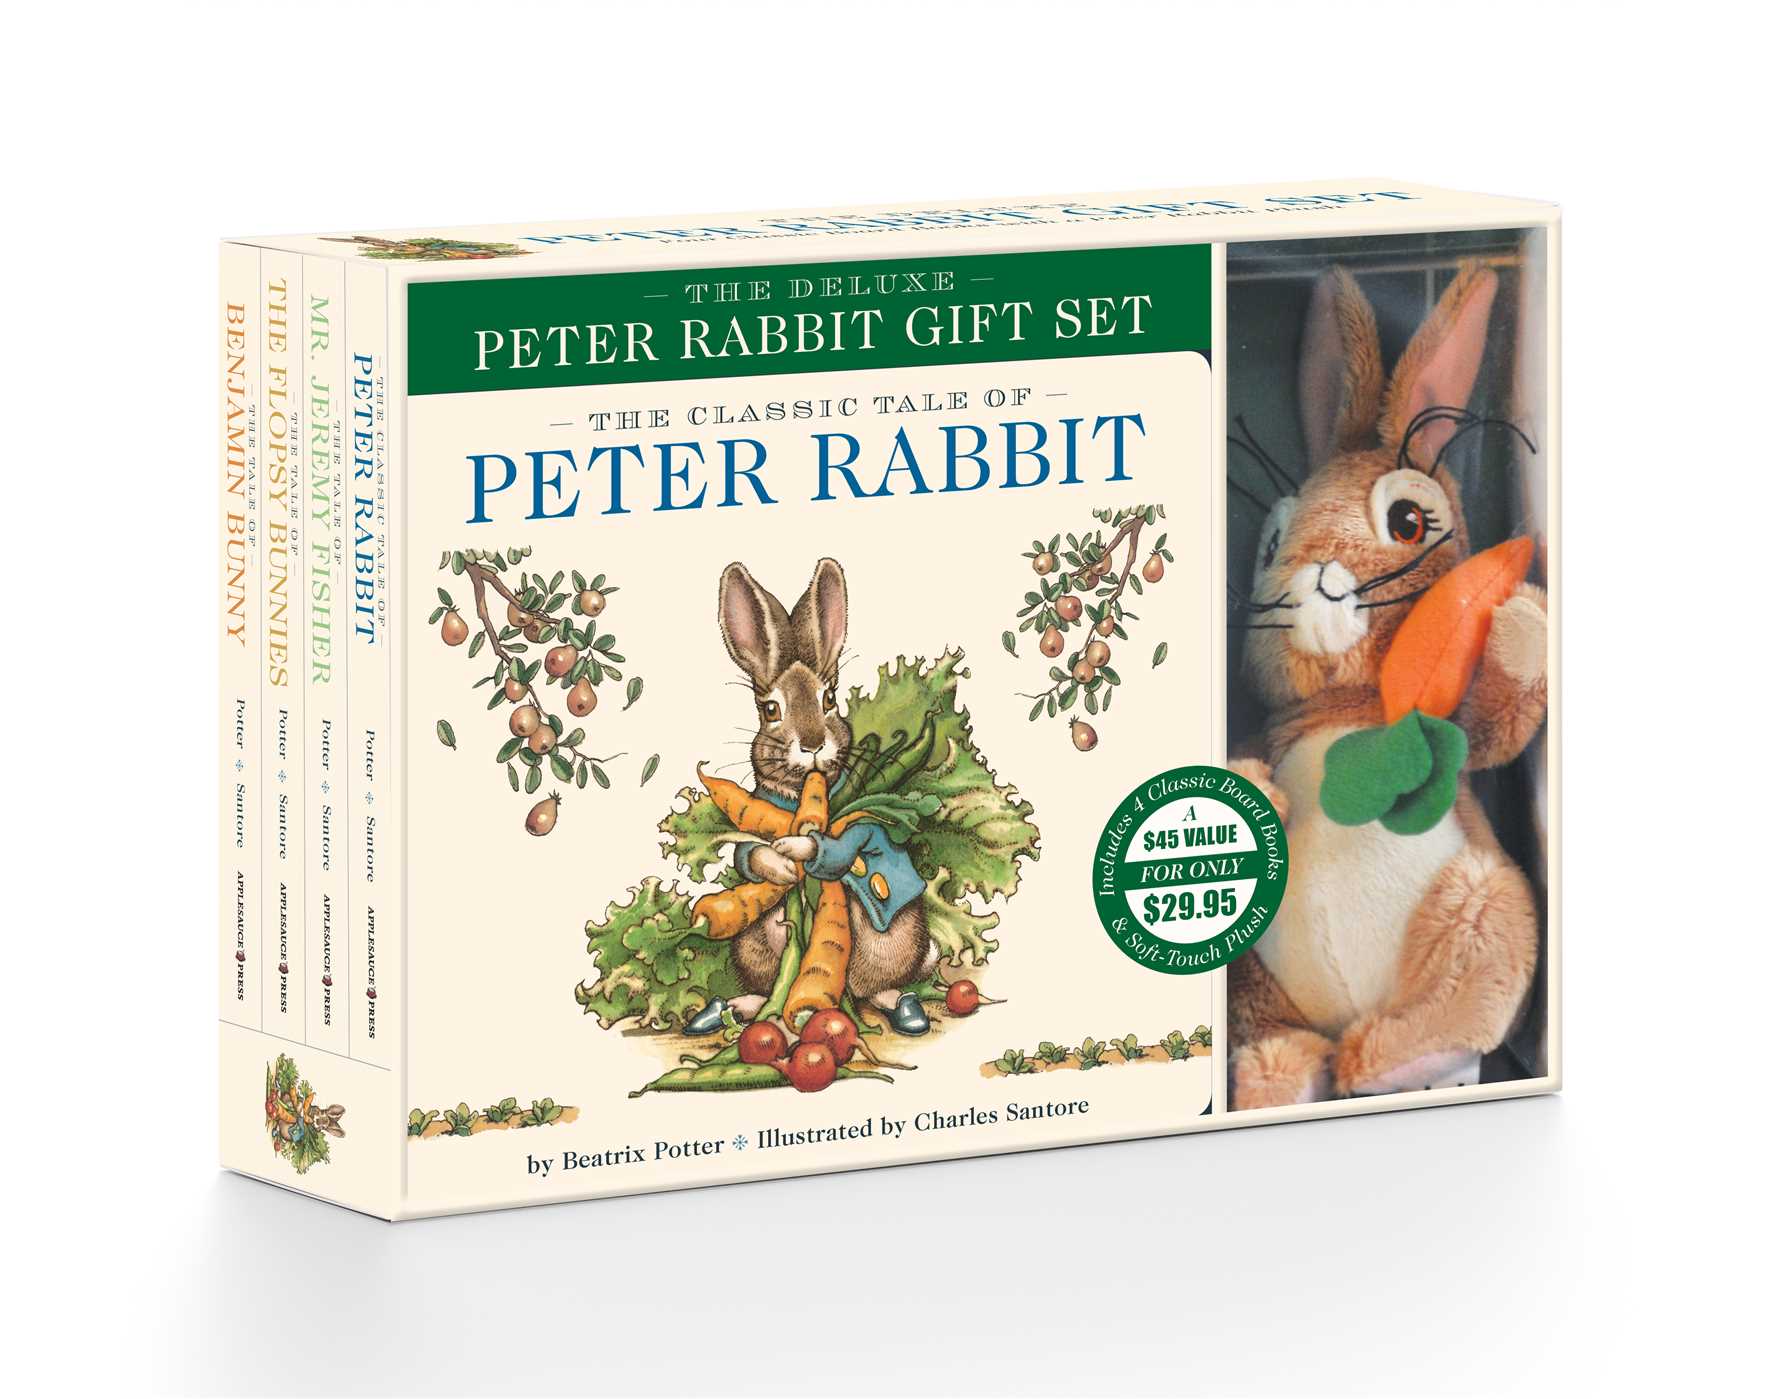 The Peter Rabbit Deluxe Plush Gift Set: The Classic Edition Board Book + Plush Stuffed Animal Toy Rabbit Gift Set [Book]